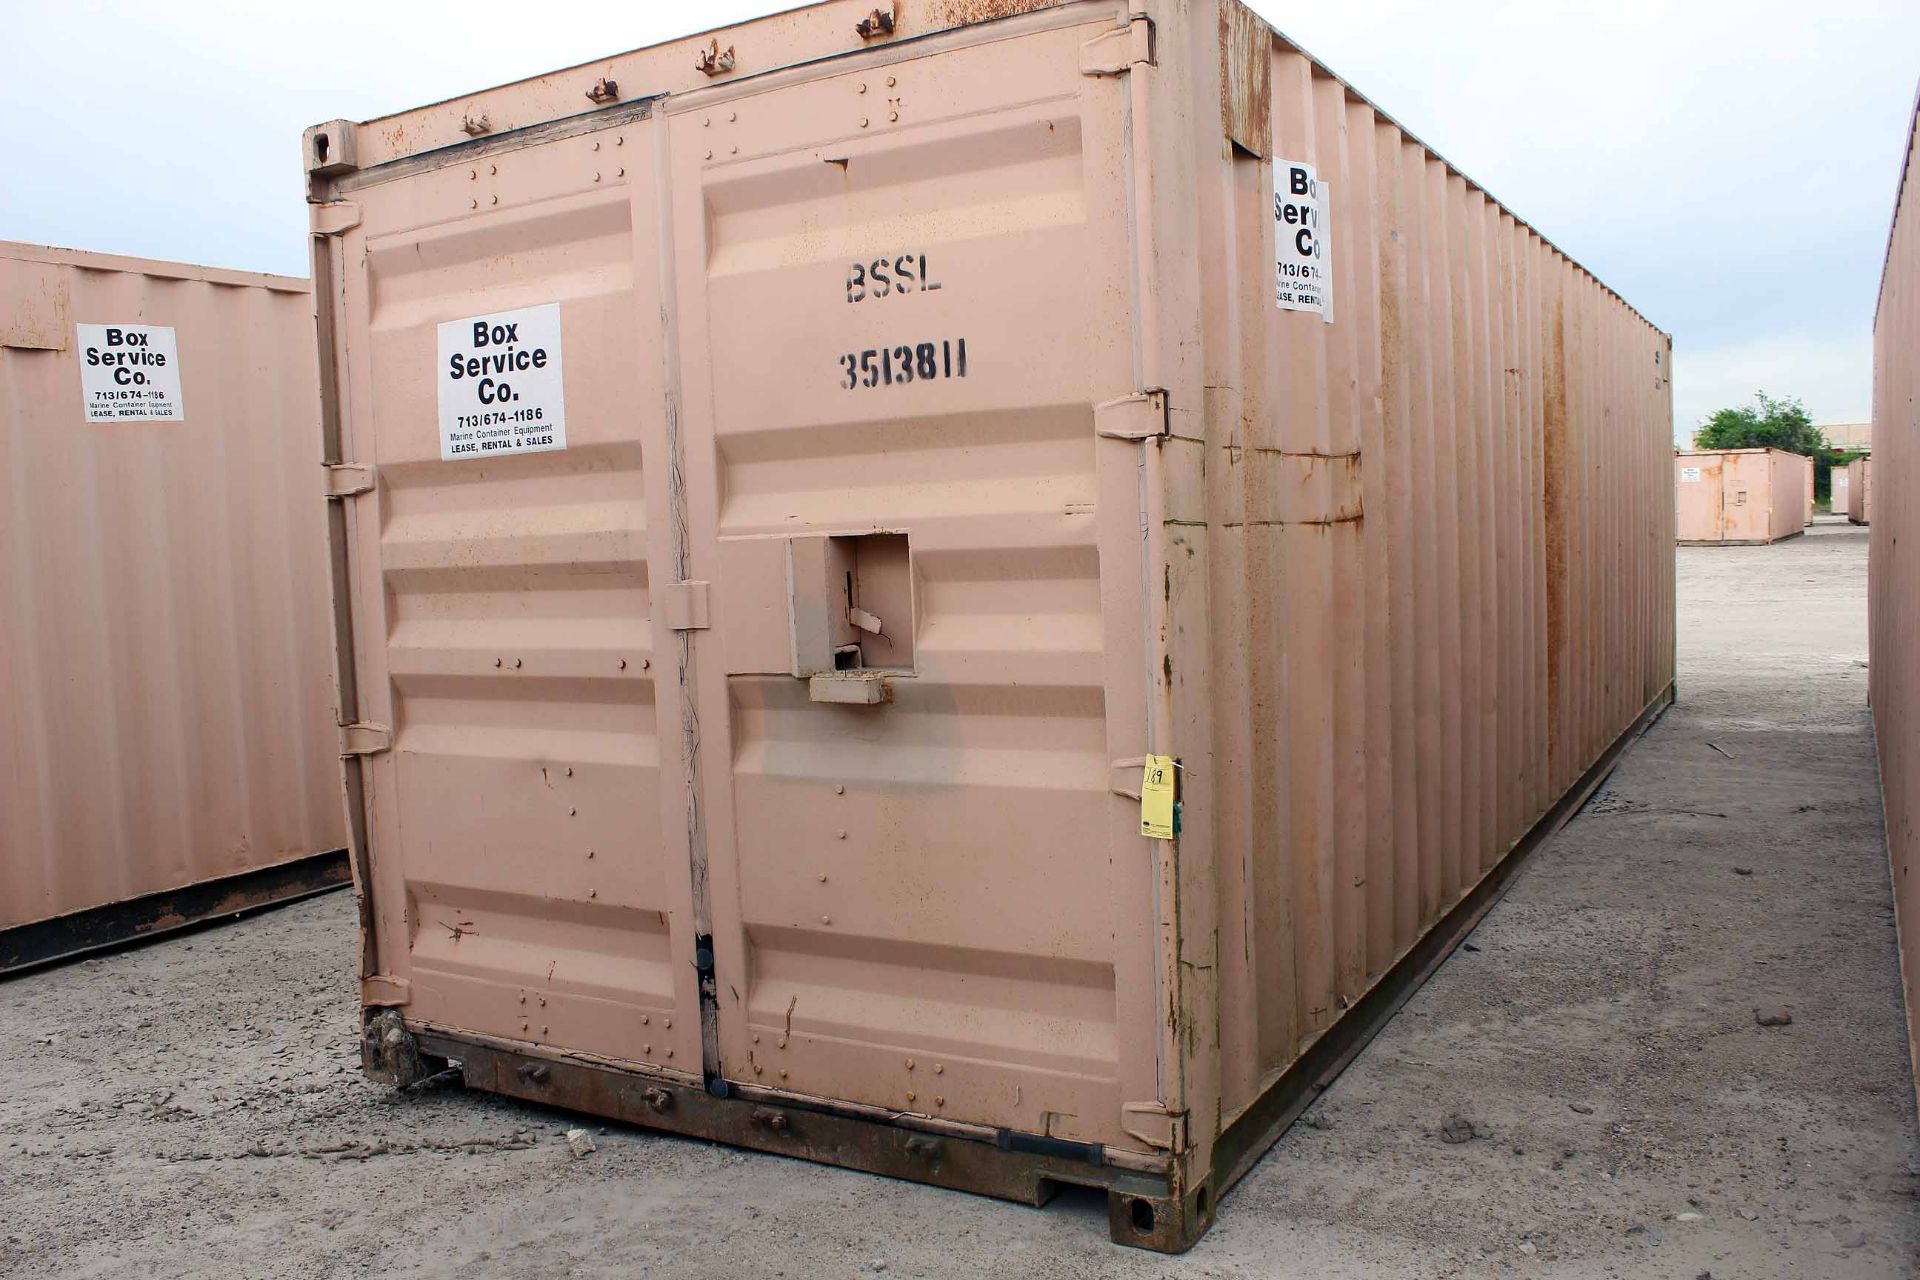 STEEL STORAGE CONTAINER, 30'L. x 96"W. x 8' ht., dbl. swing-out rear doors (Unit BSSL3513811)